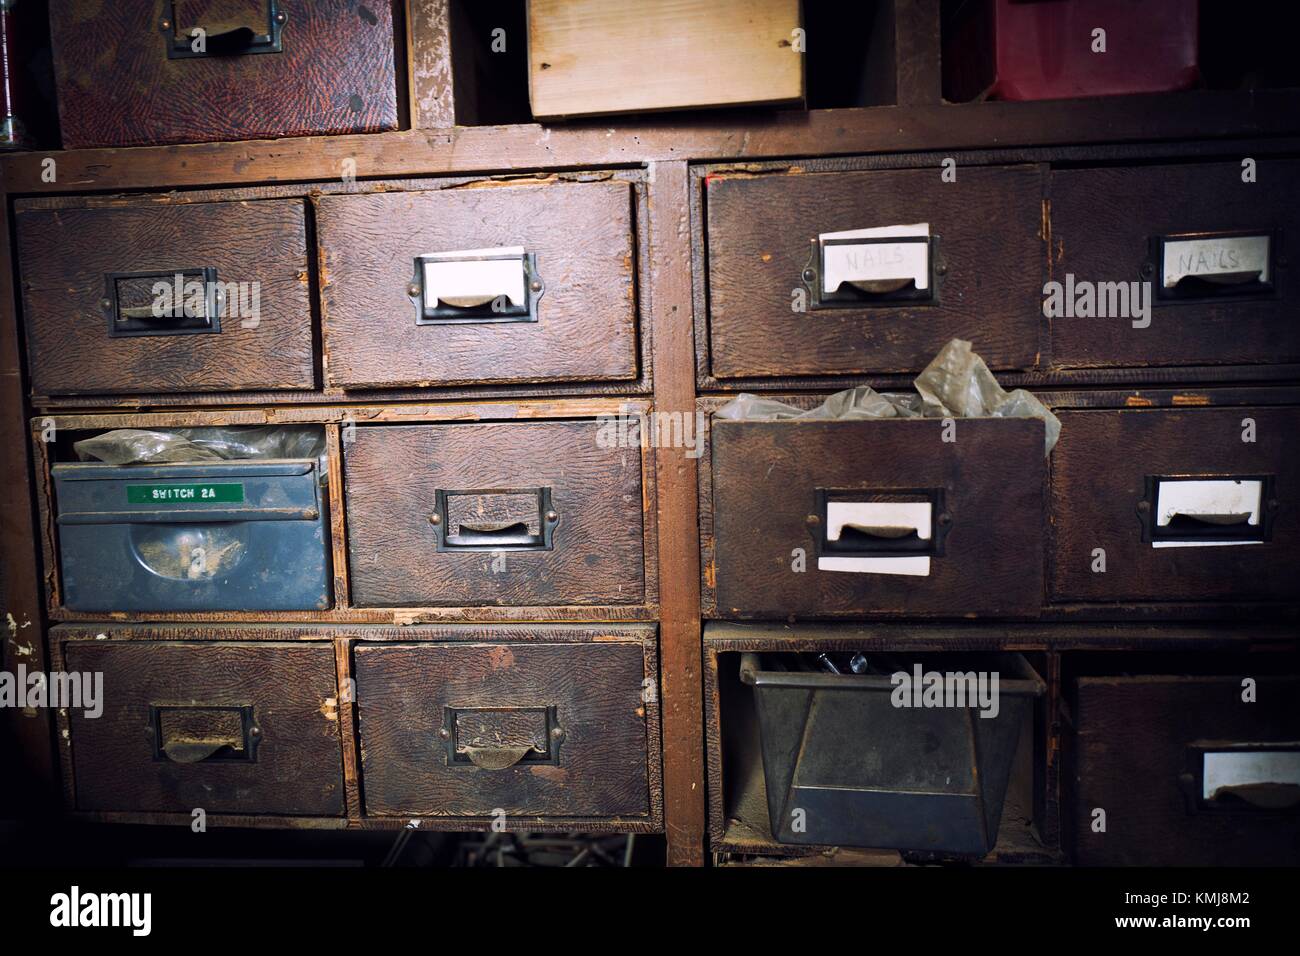 Vintage filing cabinet with wooden drawers in a carpentry workshop. Keighley, Bradford, West Yorkshire, UK. Stock Photo